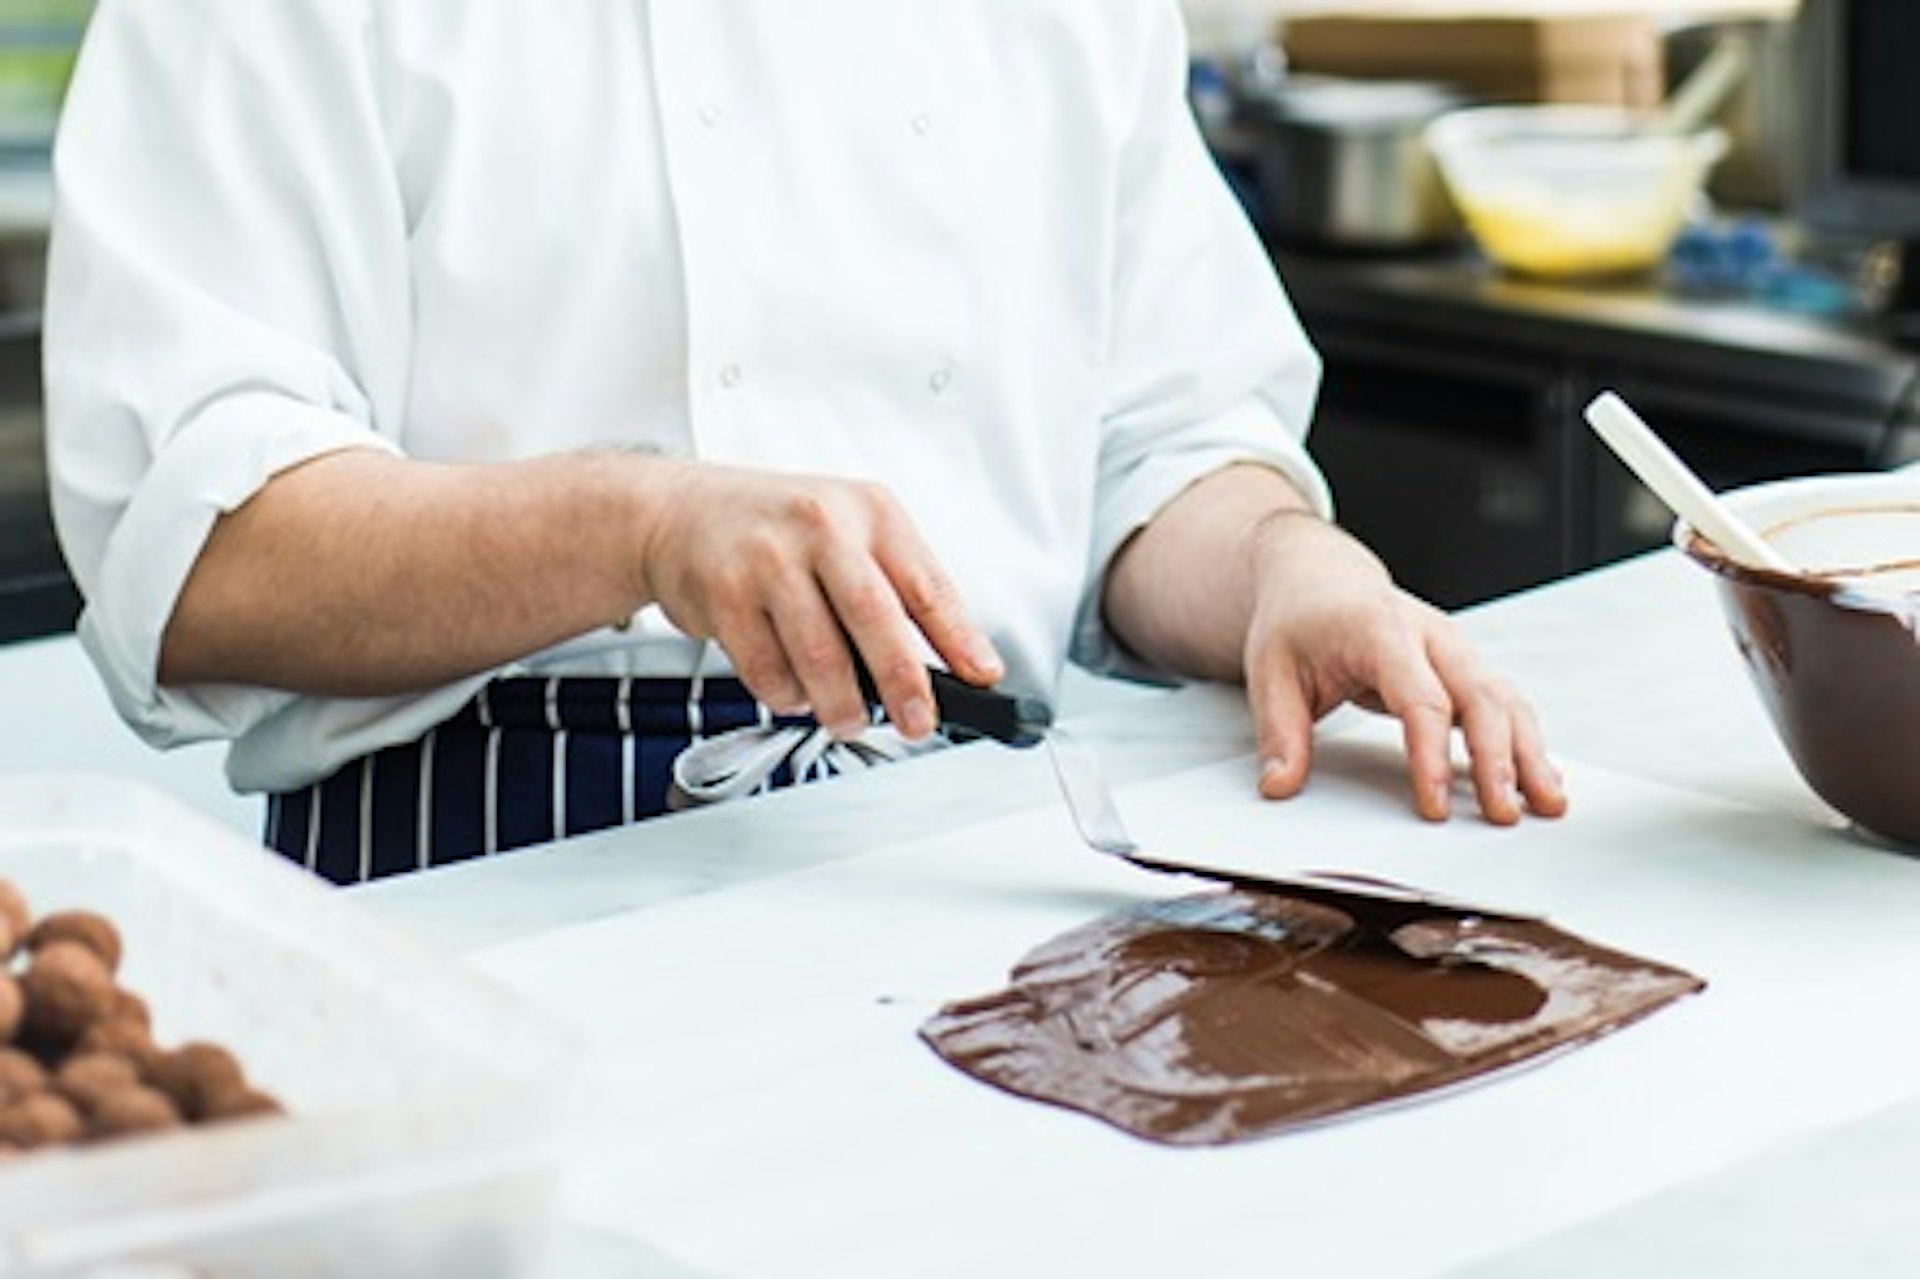 Taste and Make Your Own Amazing Chocolate for Two with Melt Notting Hill, London 1